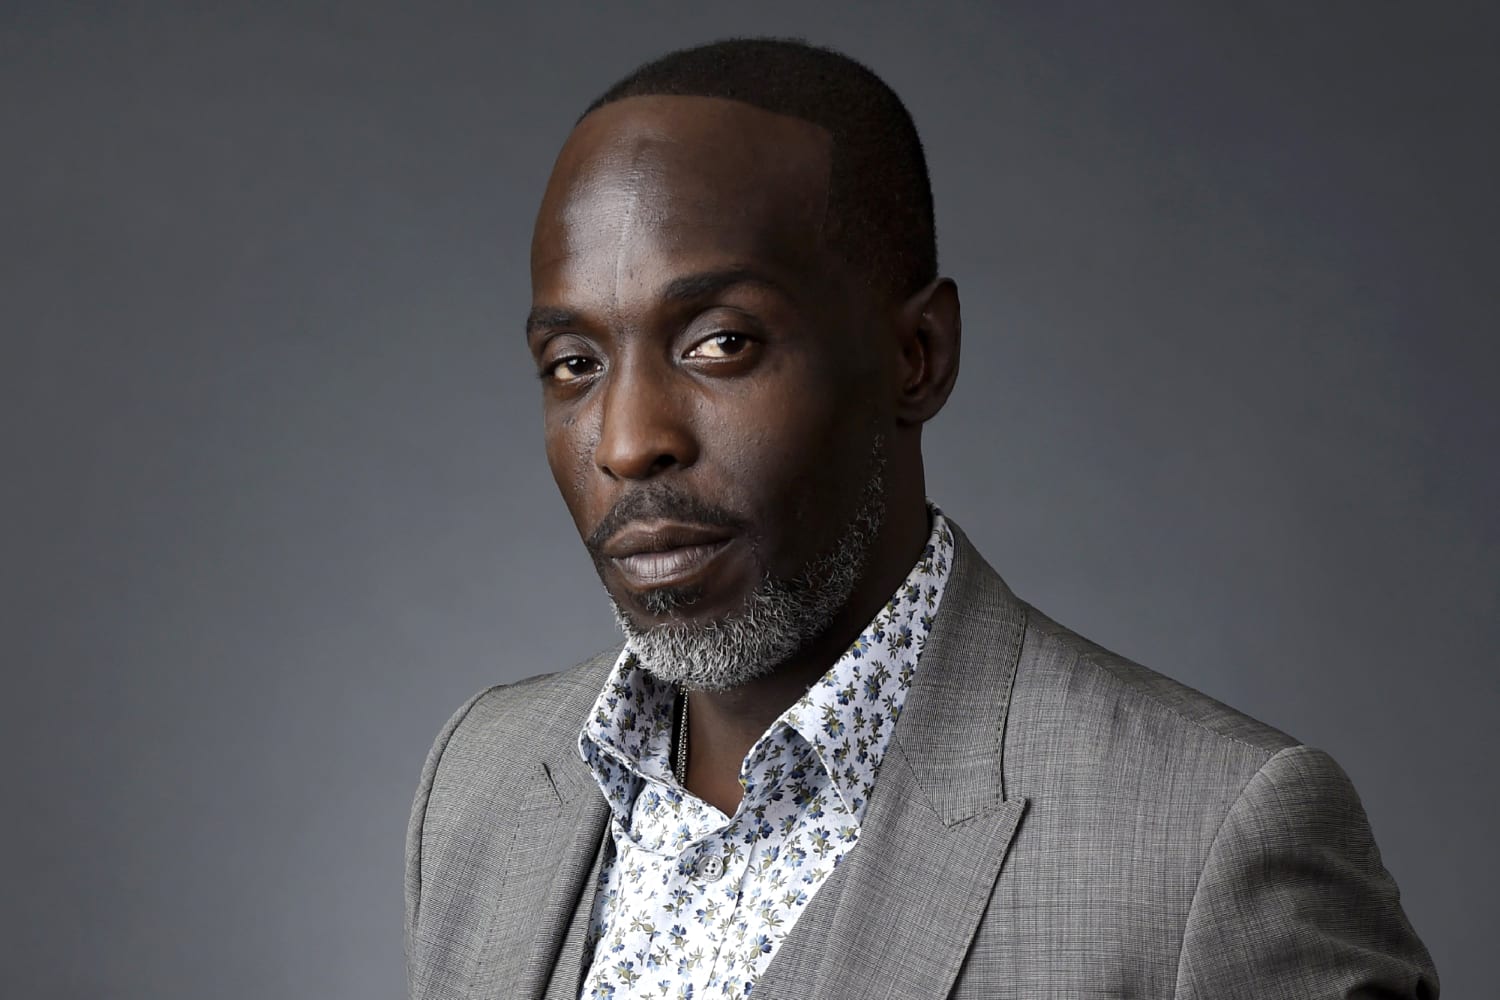 Dealer sentenced to 10 years in prison in death of ‘The Wire’ actor Michael K. Williams